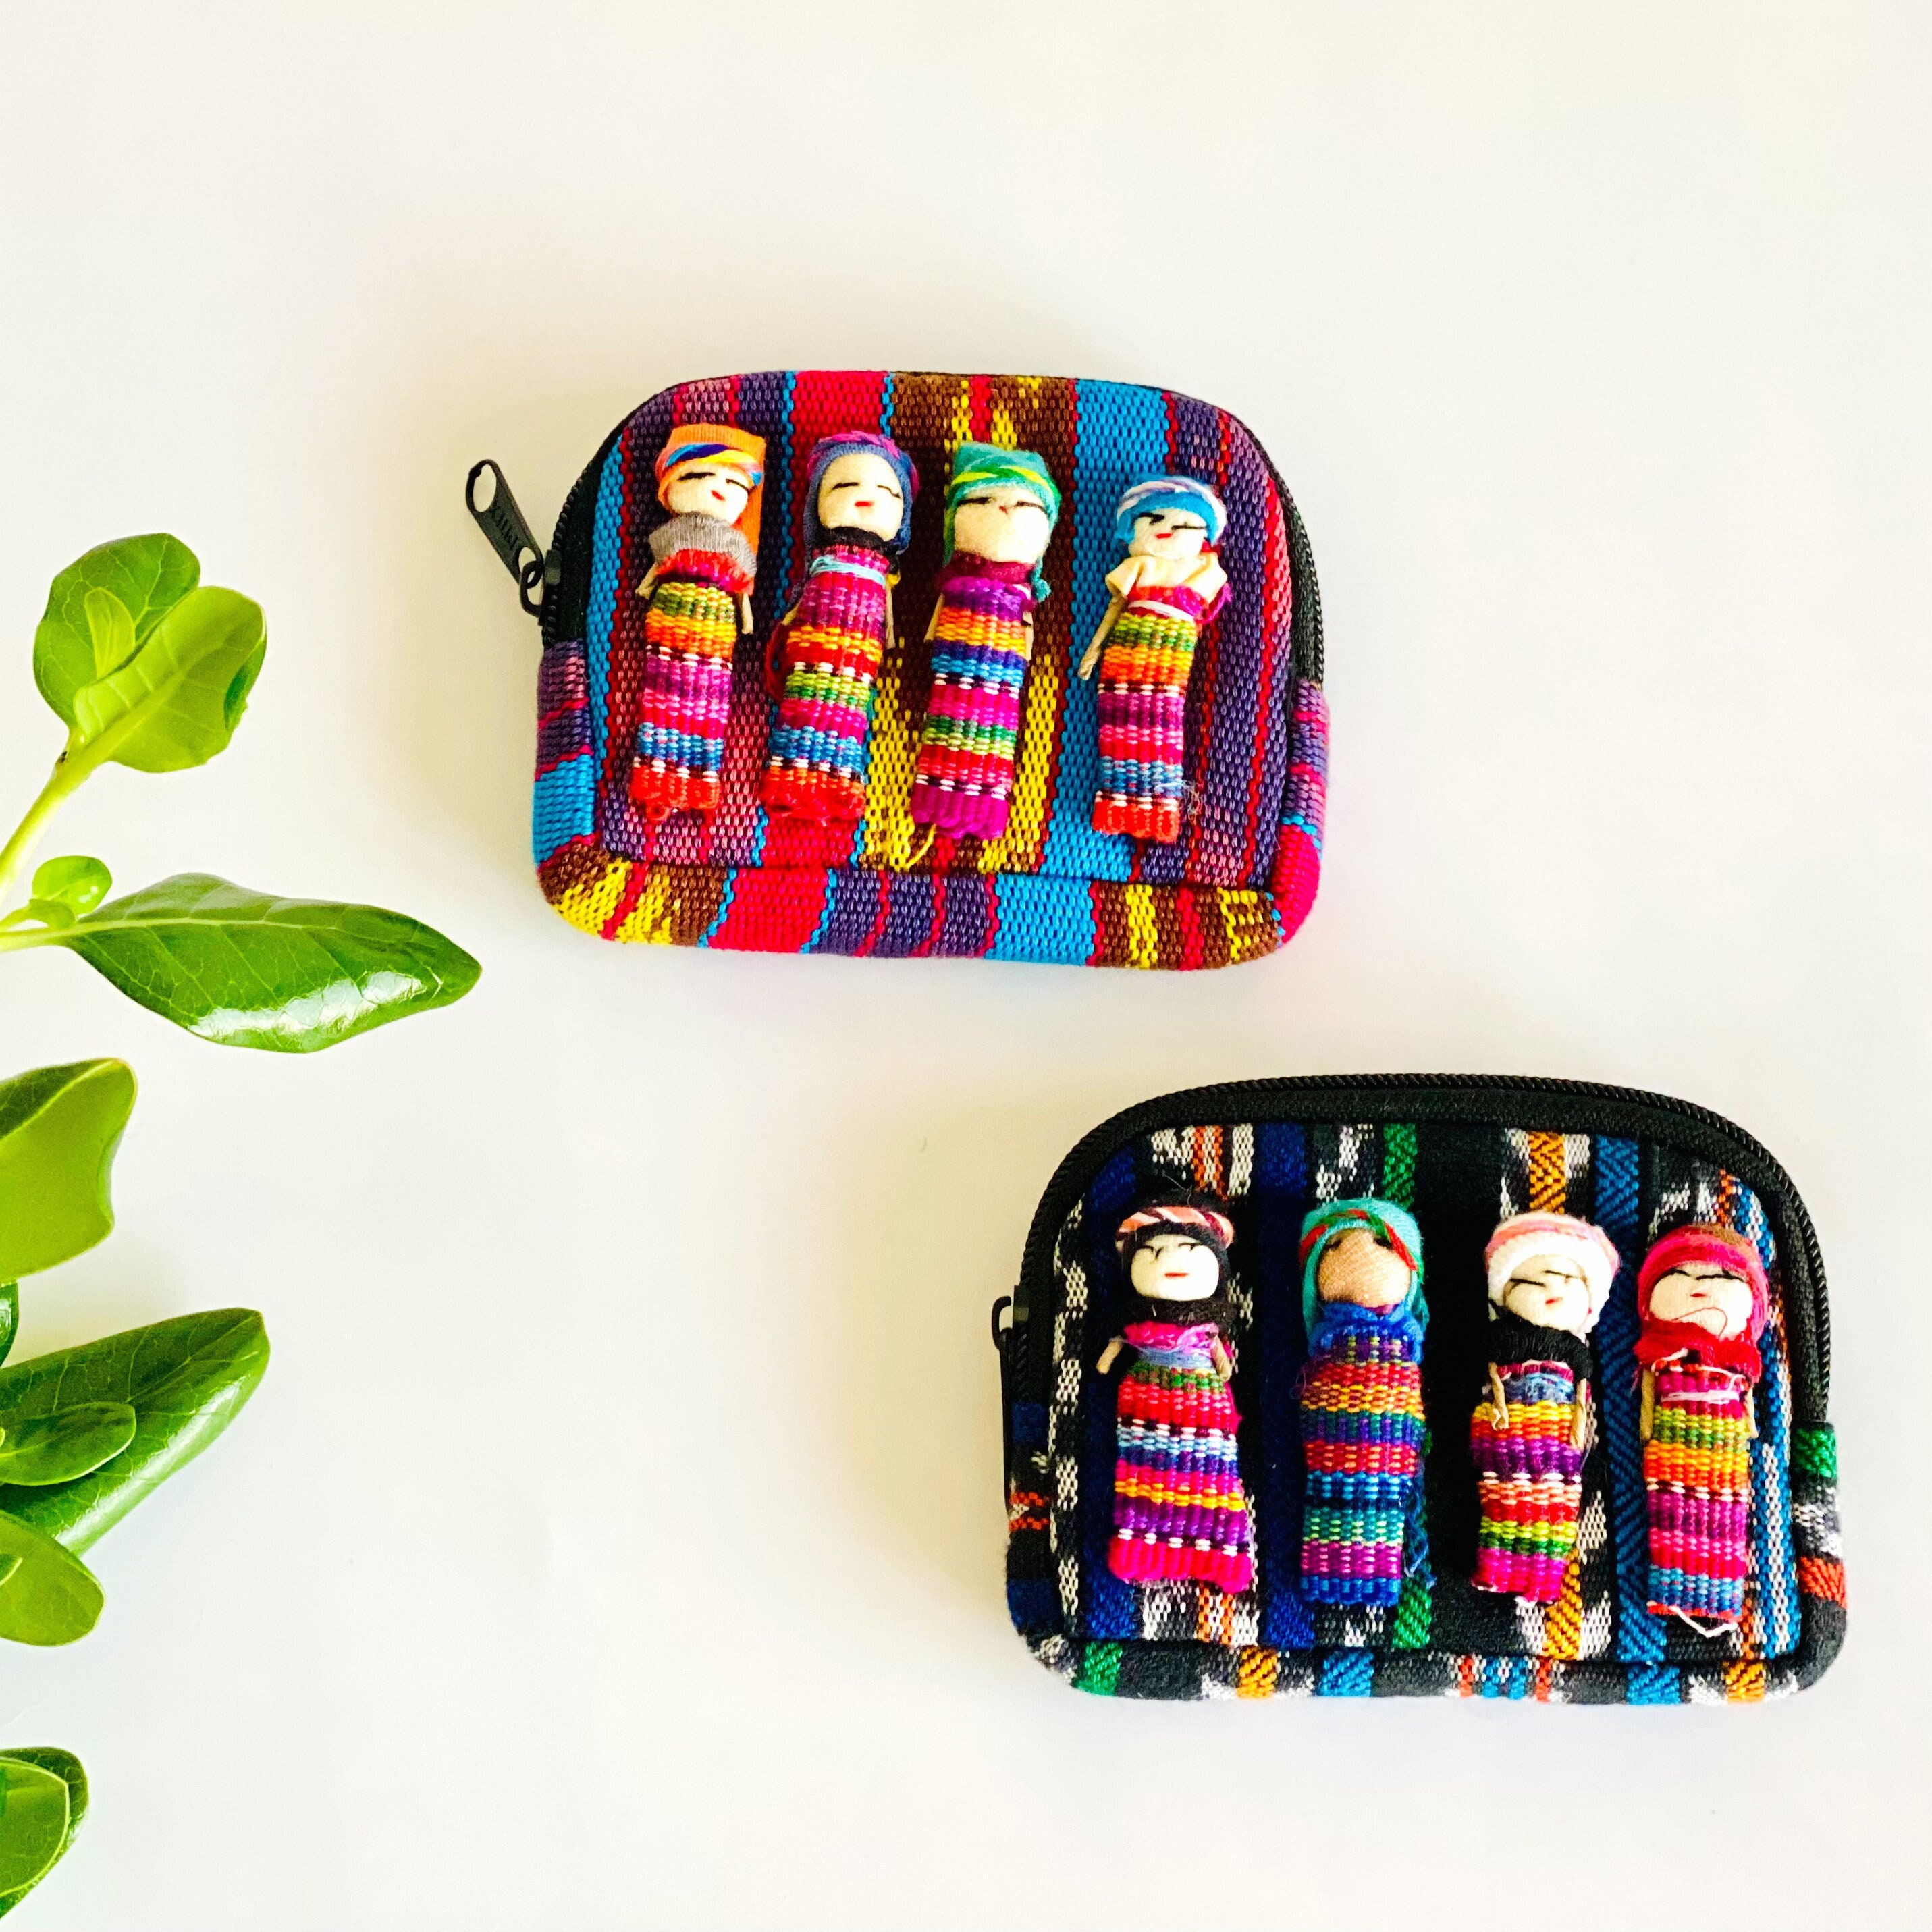 Set of 10 Guatemalan Handmade Worry Dolls With a Colourful Crafted